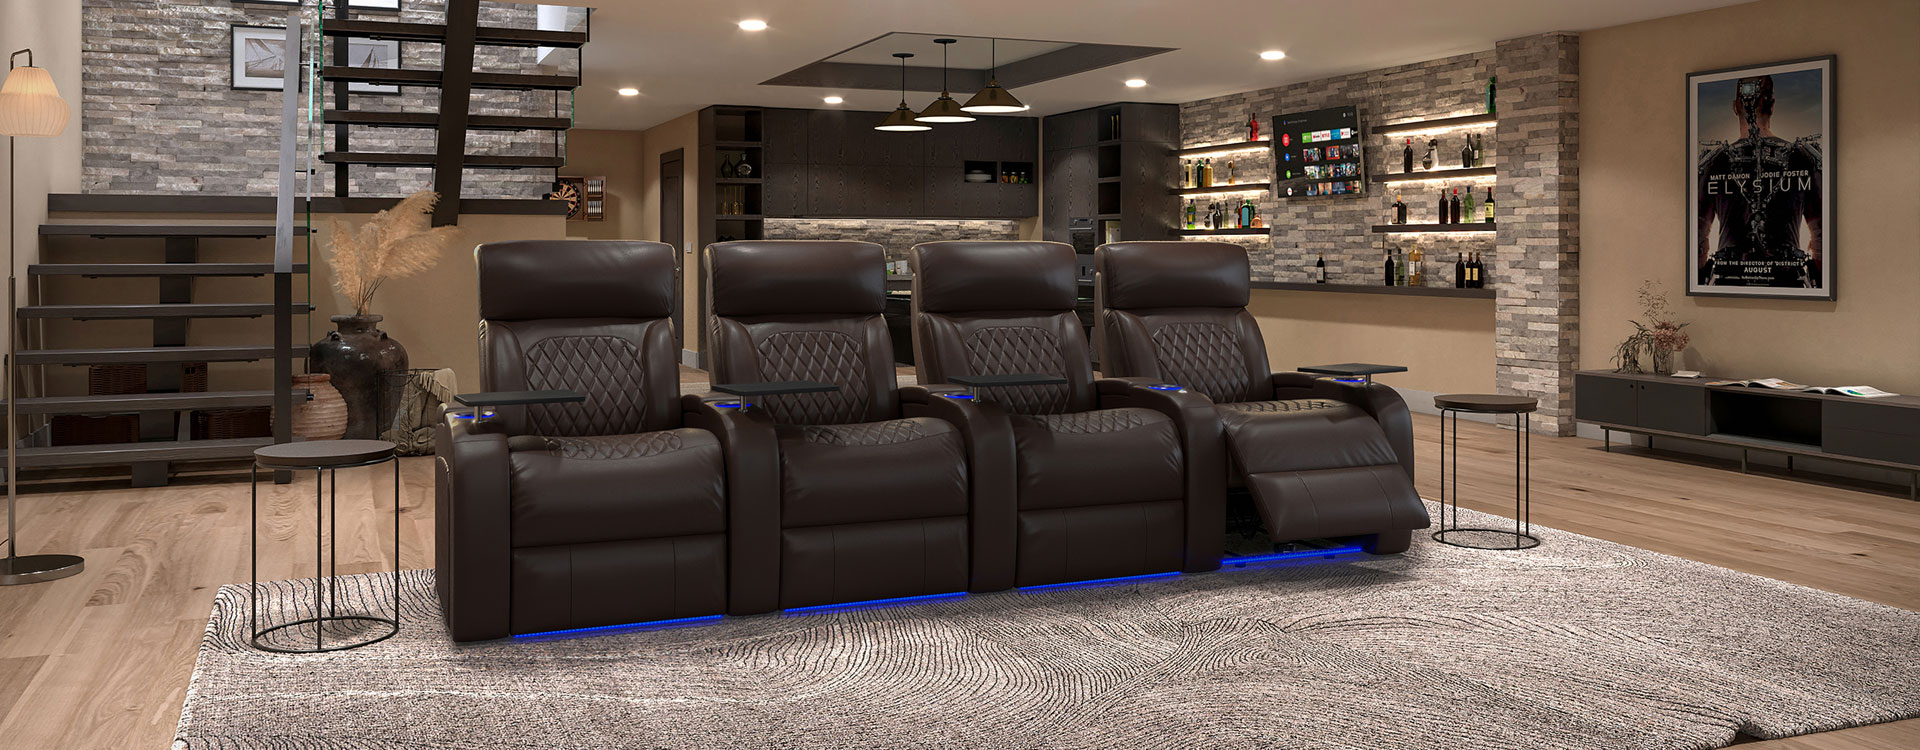 Home Theater Seating Luxurious, Leather Theater Seats